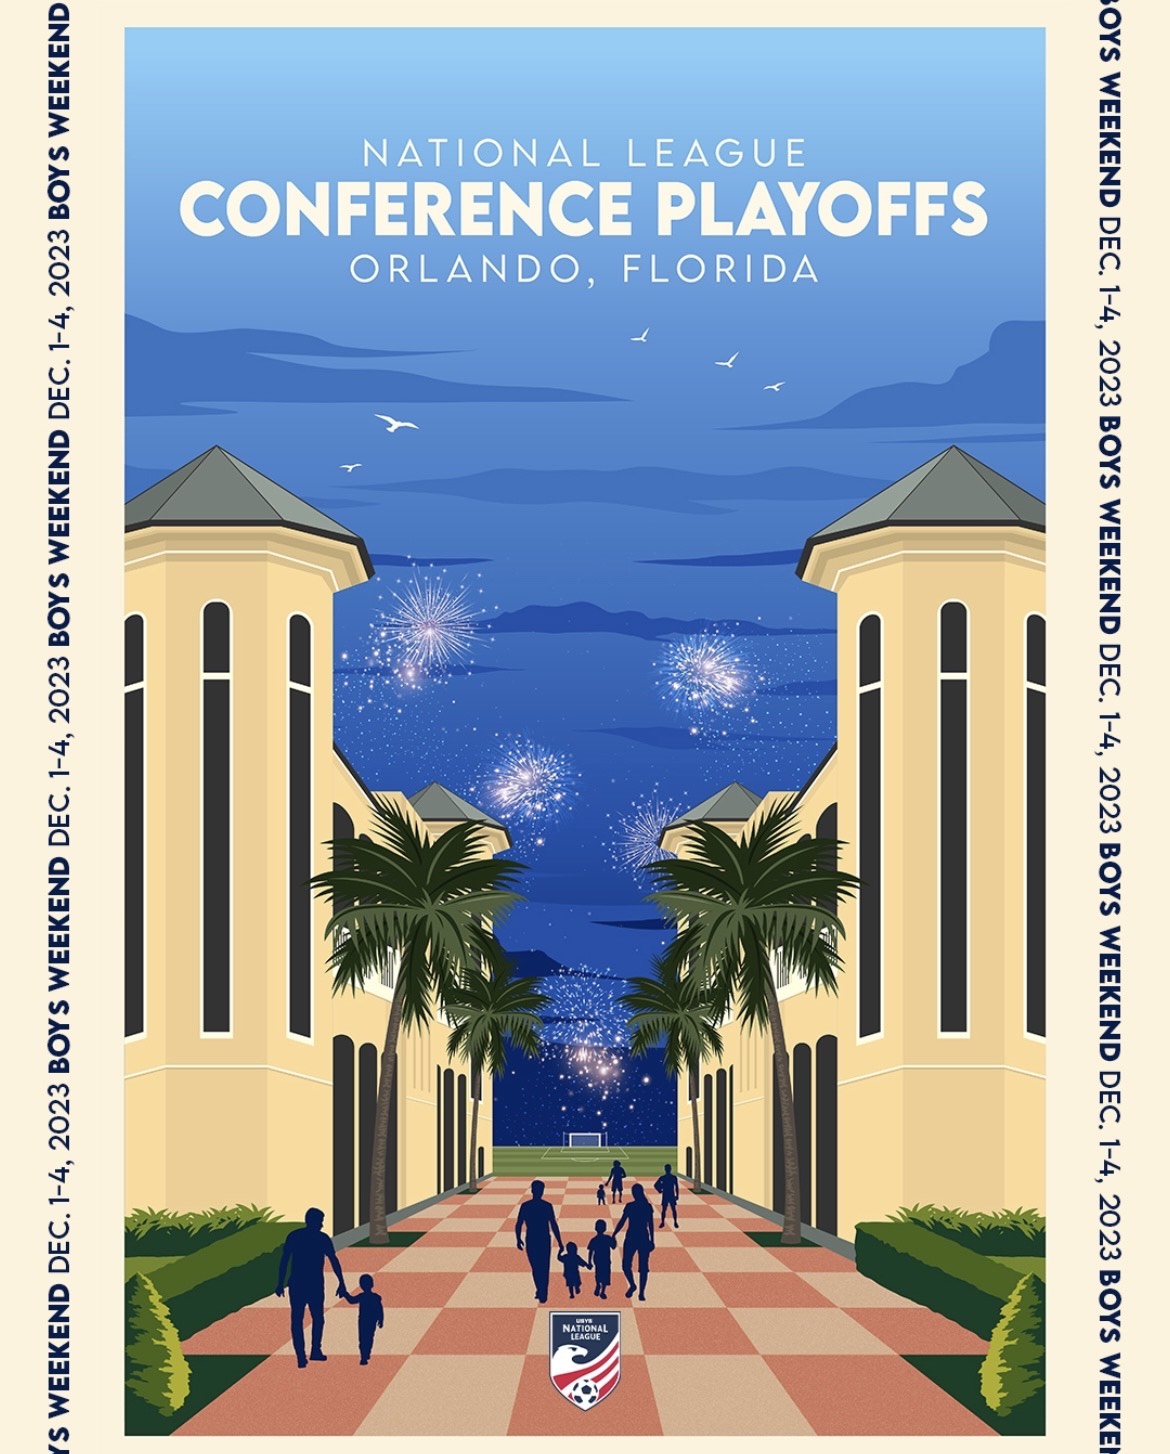 Conference Playoffs Poster